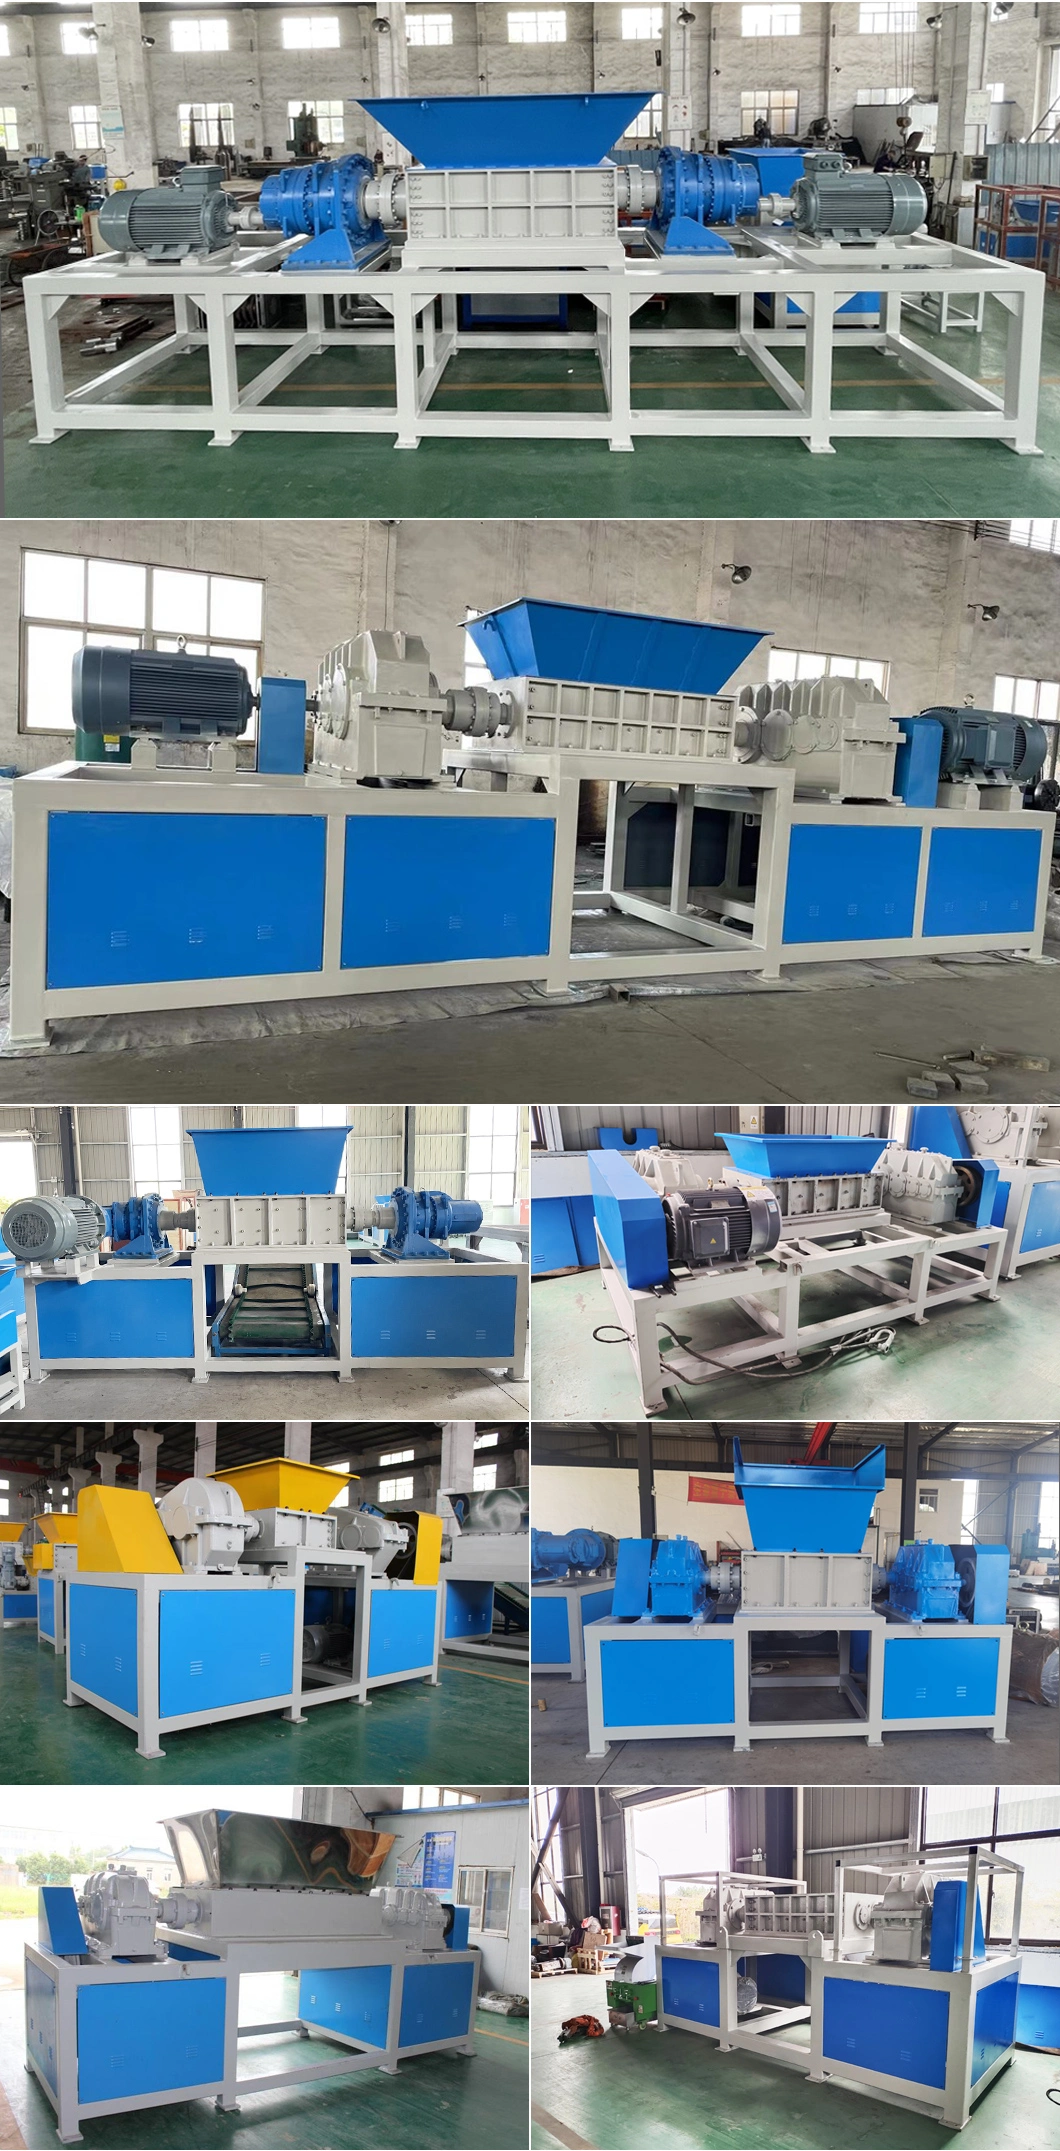 Free Blades Knives!!!Giant High Capacity Large Output All Purpose Multipurpose Dead Animals Poultry Meat/Bone/Carcass/Body Shredder Machine for Feed Recycling